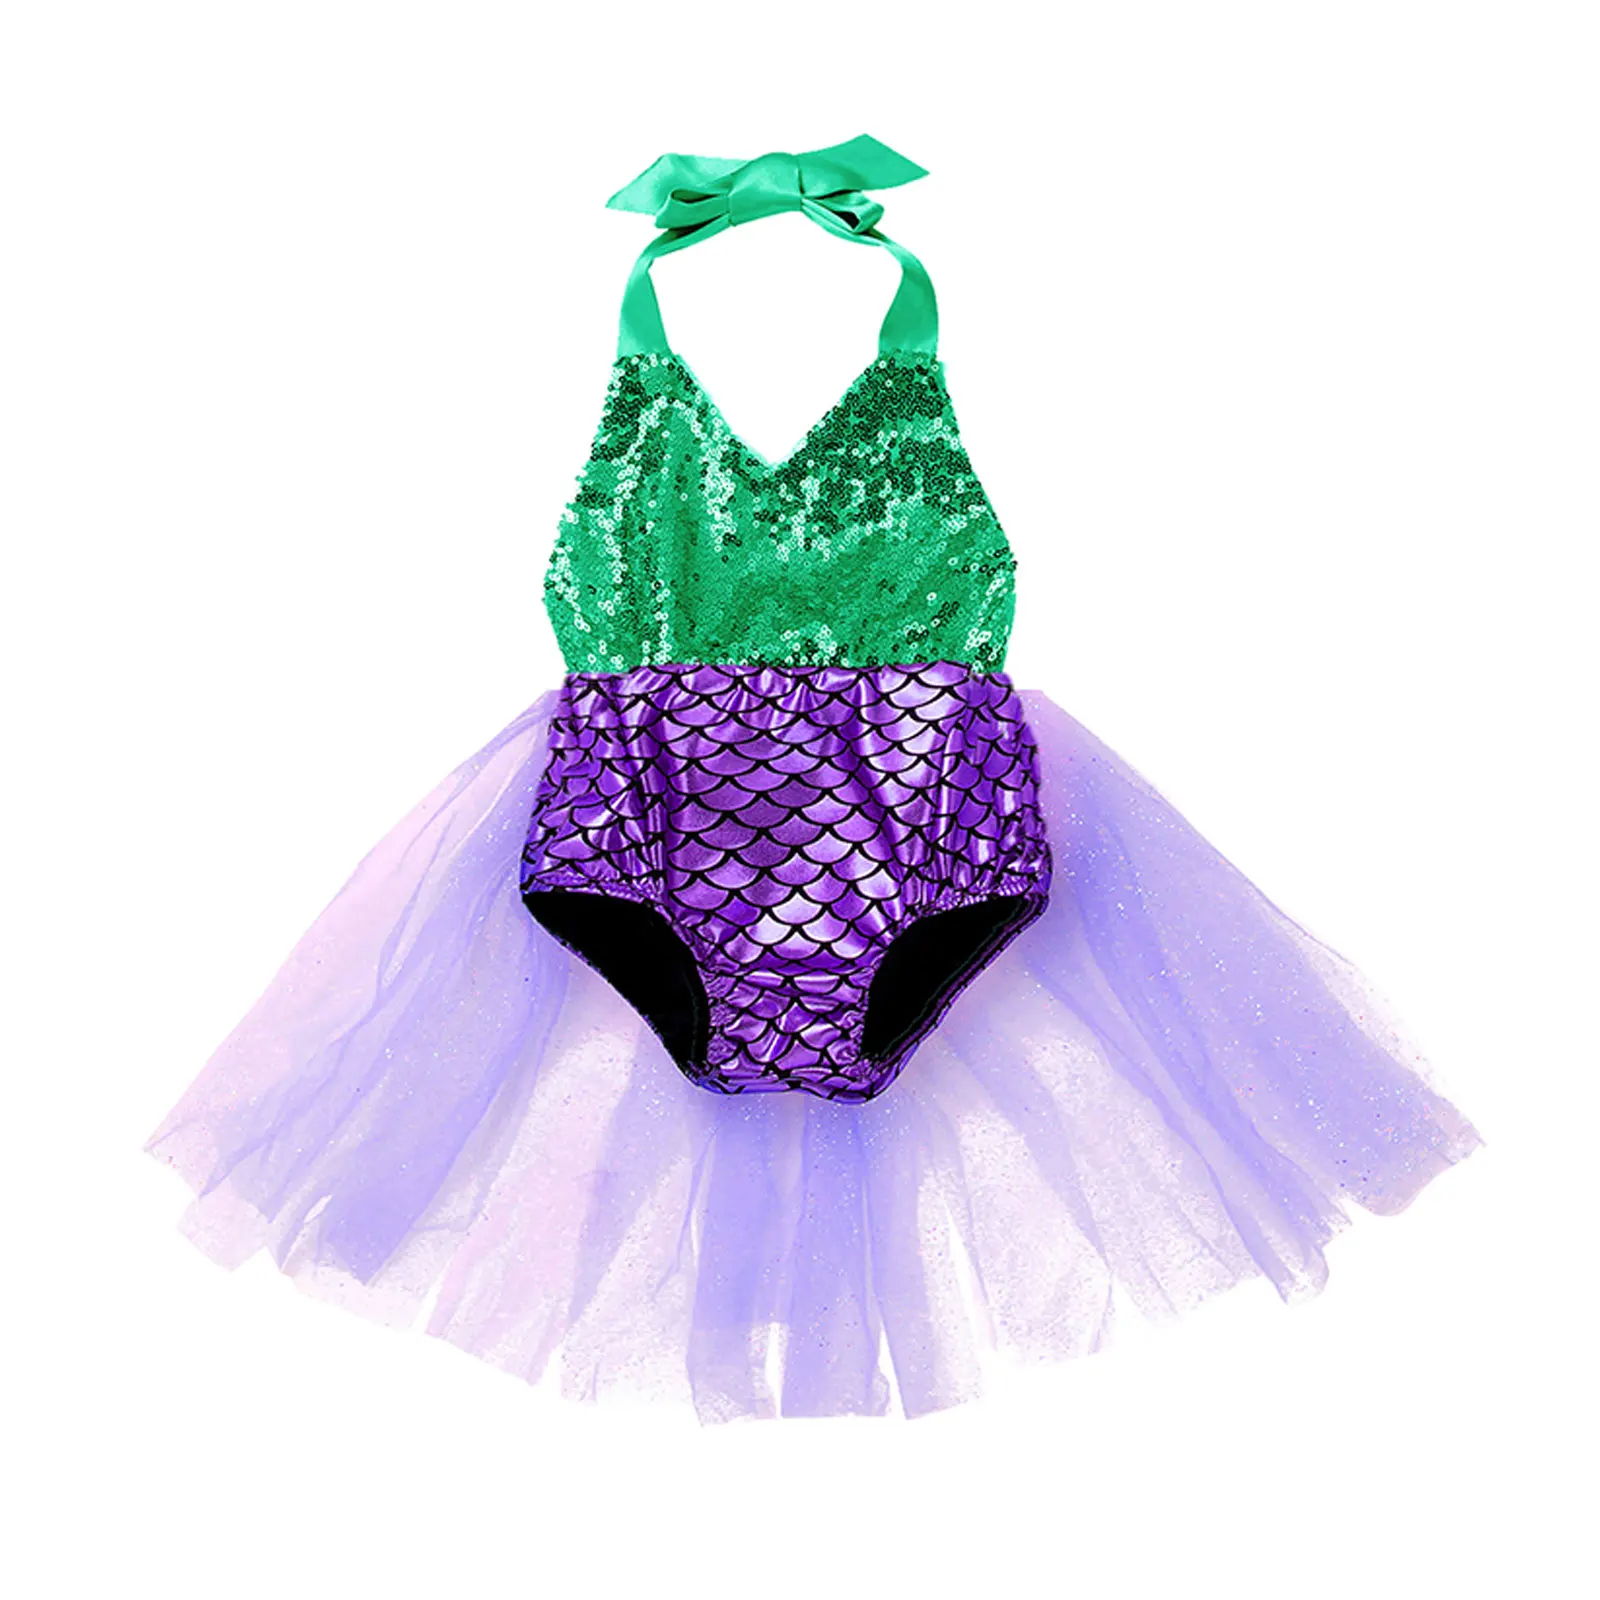 Newborn Sailor Romper Girls Boy Costume Anchor Mermaid Costume Newborn Infant Baby Girls Sequins Mermaid Rompers Jumpsuit Princess Mesh Tutu Dress Outfits Baby Girl Clothing Baby Bodysuits are cool Baby Rompers